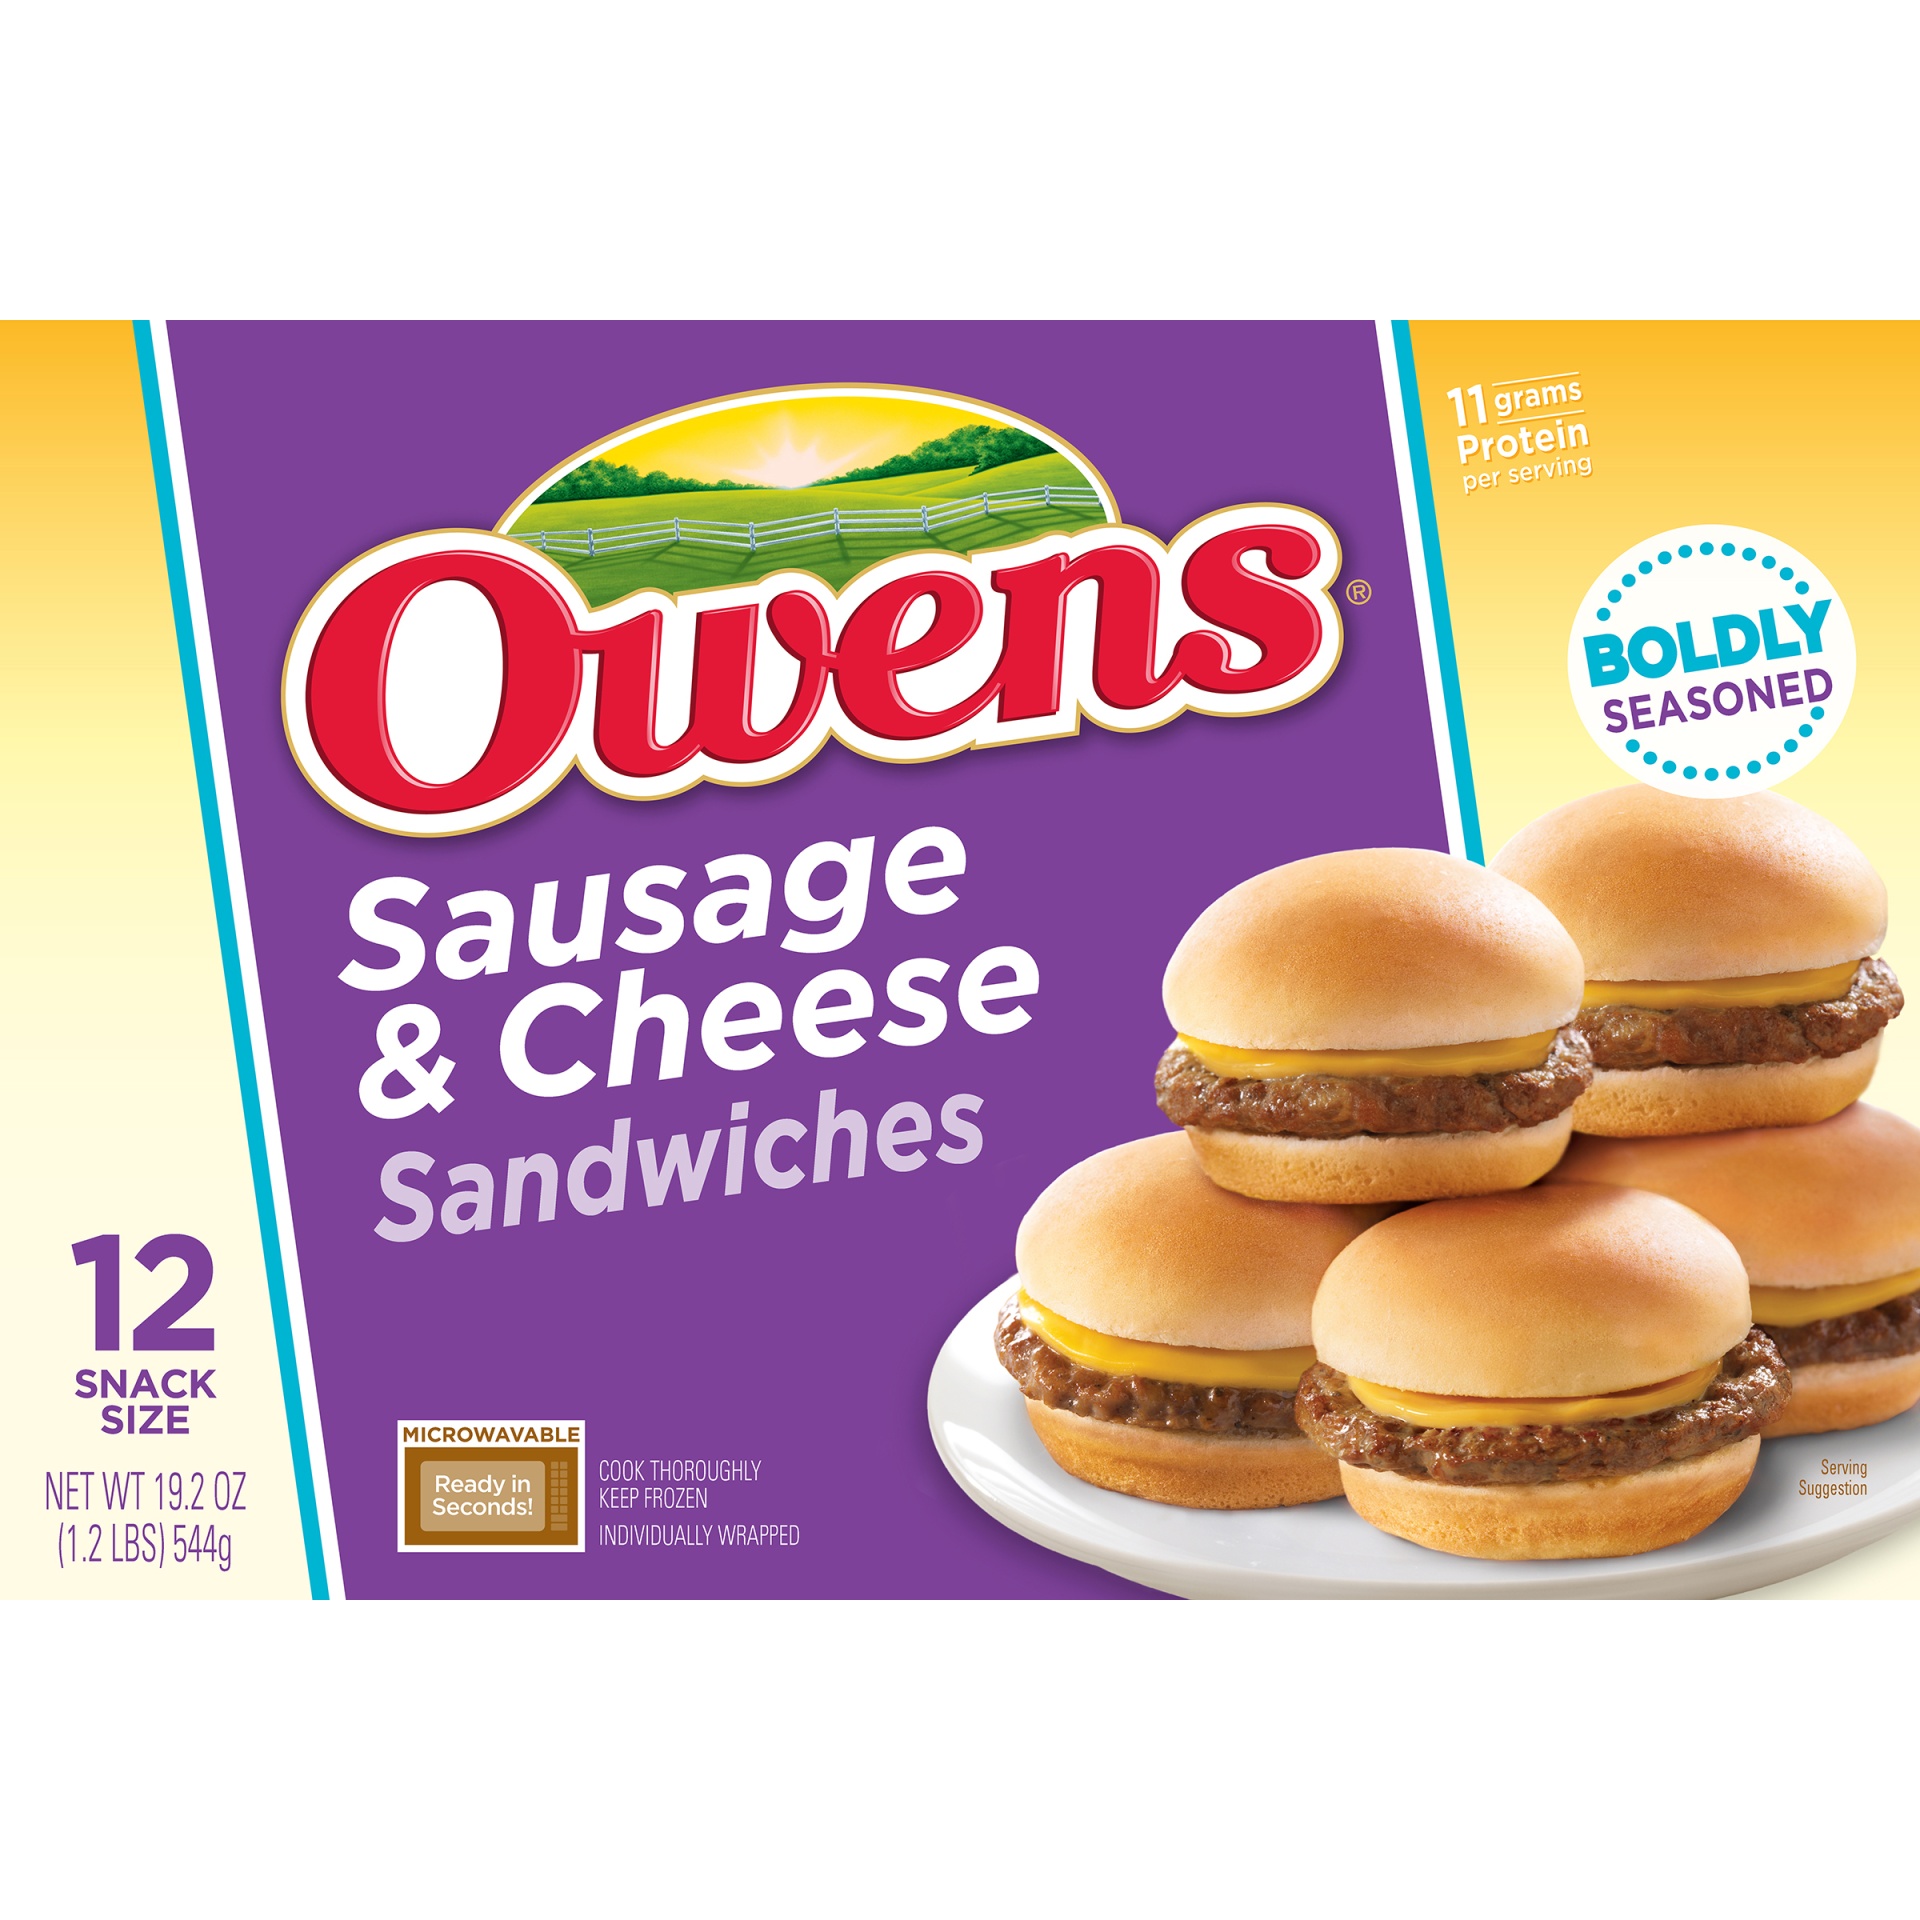 slide 6 of 8, Owens Sausage & Cheese Sandwiches, 12 ct